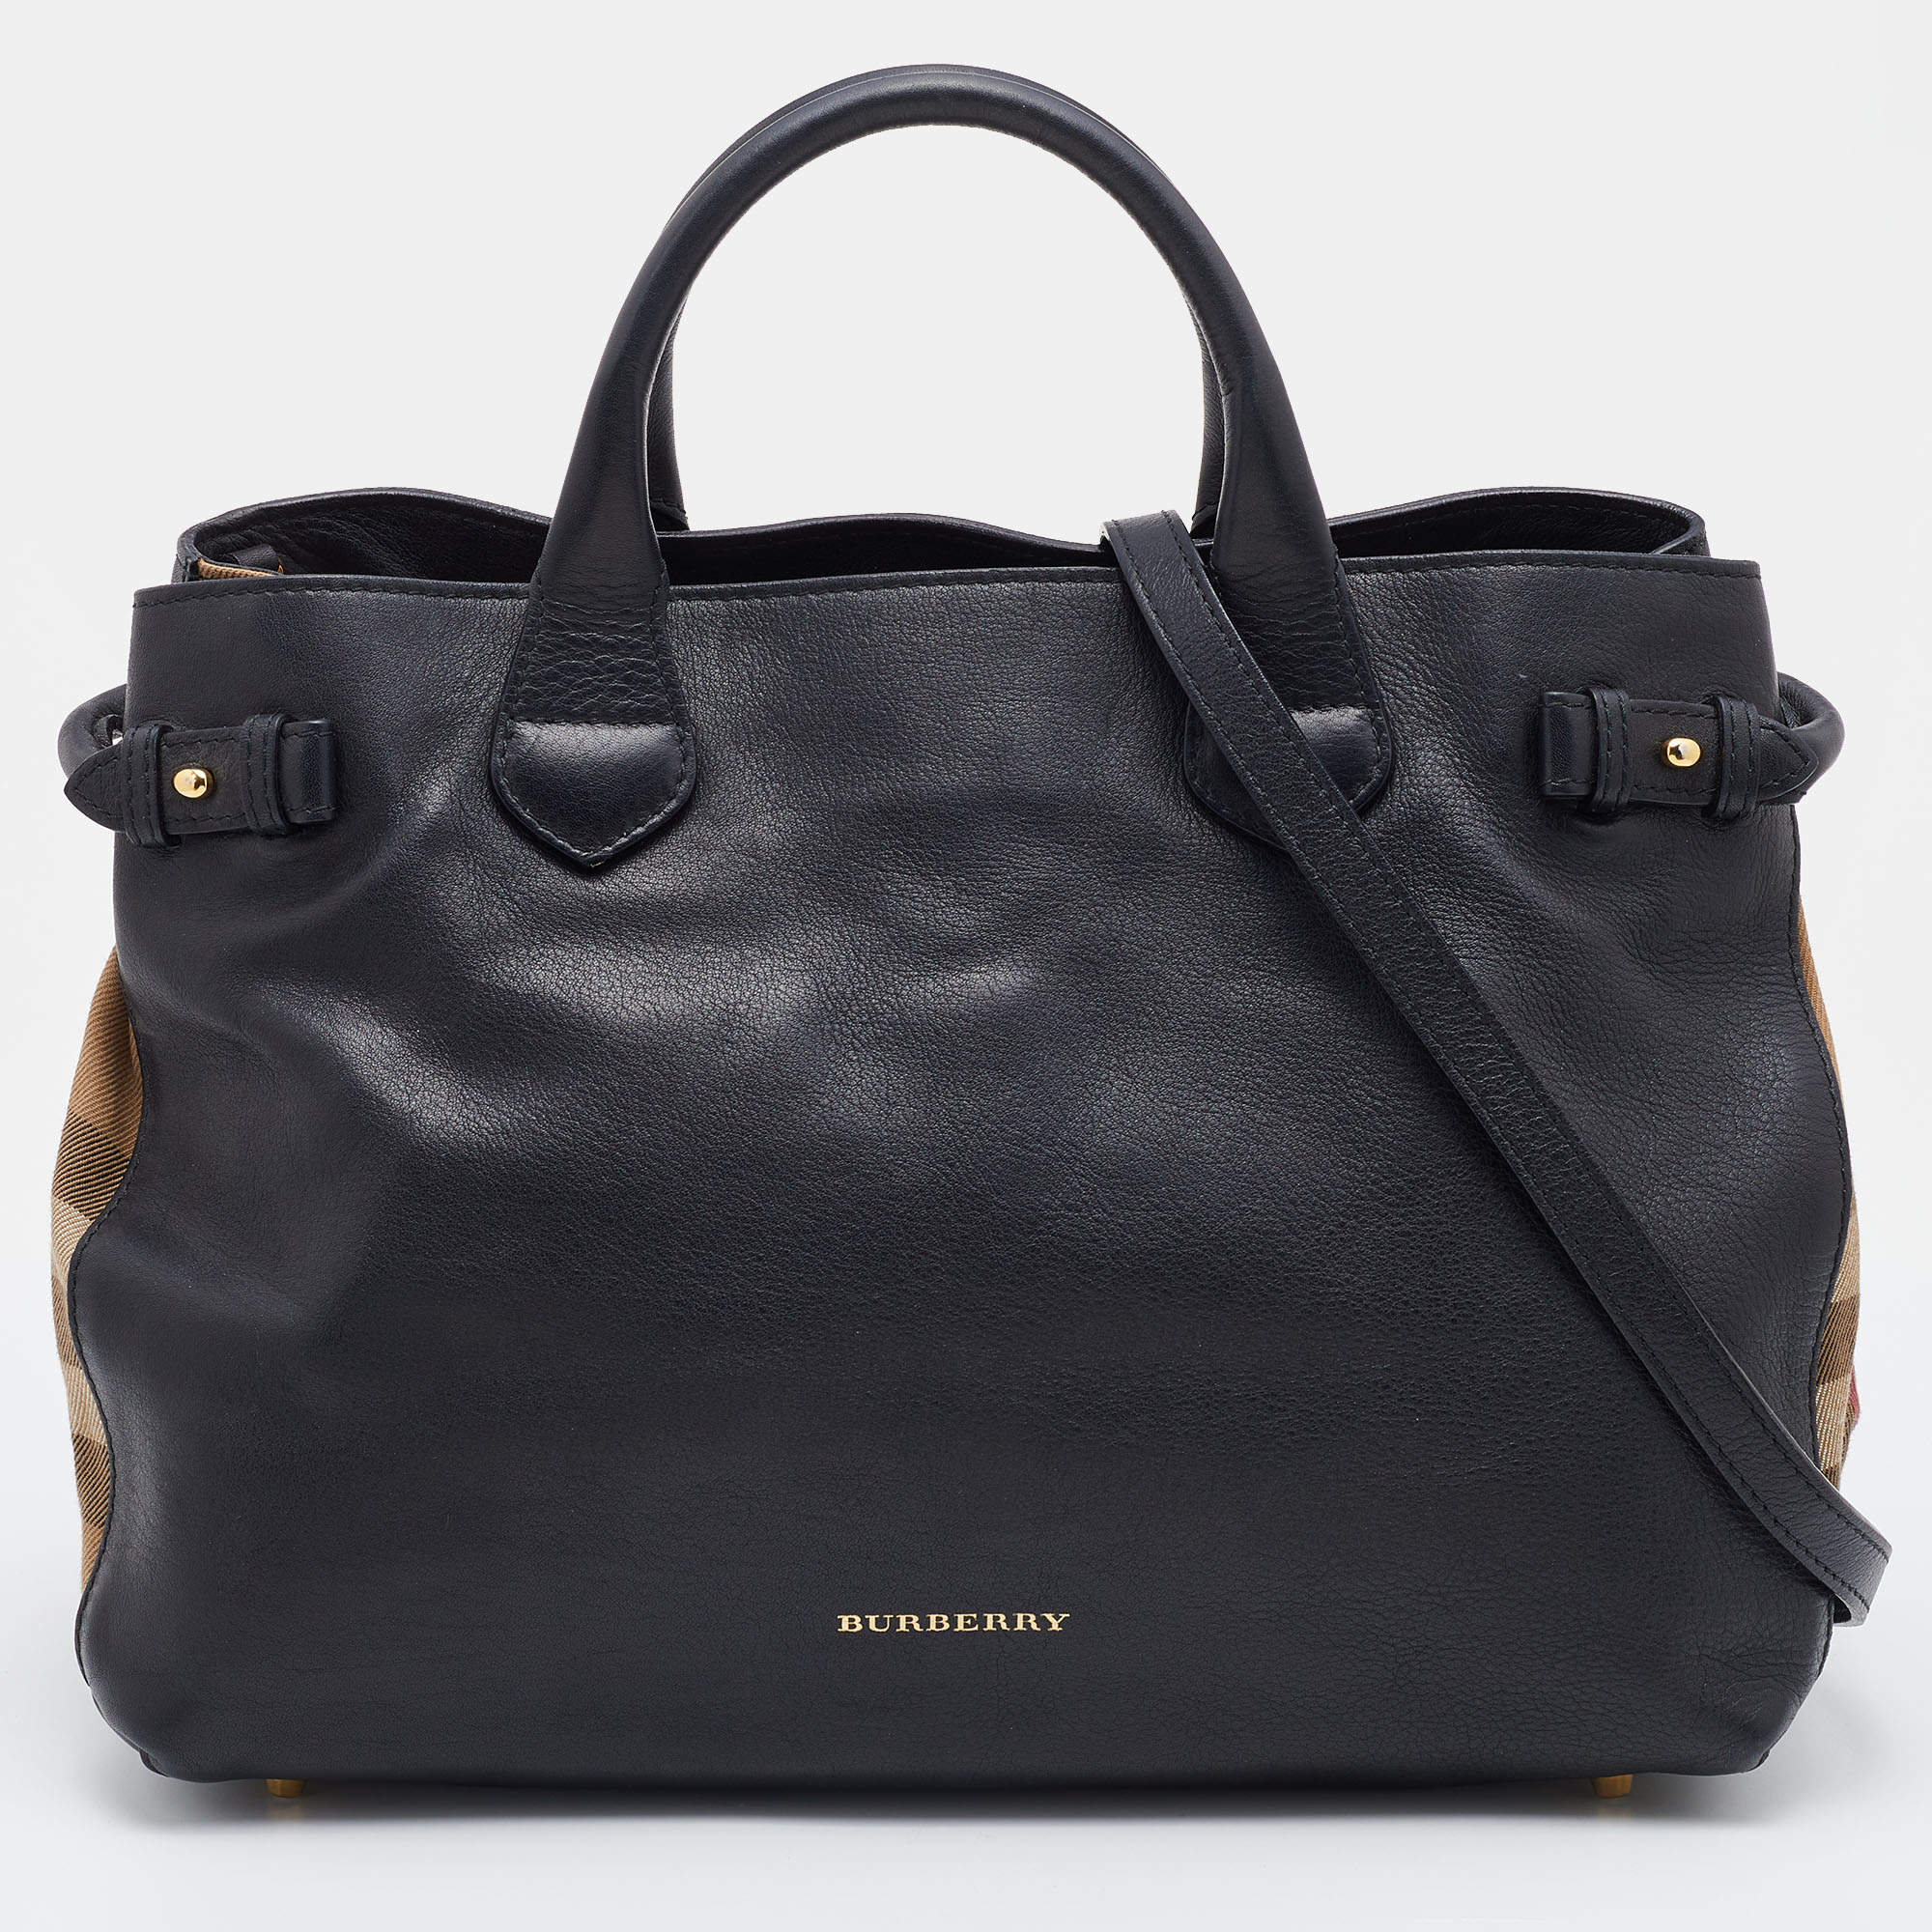 NWT Burberry Leather Banner Tote Bag for Sale in Miami Beach, FL